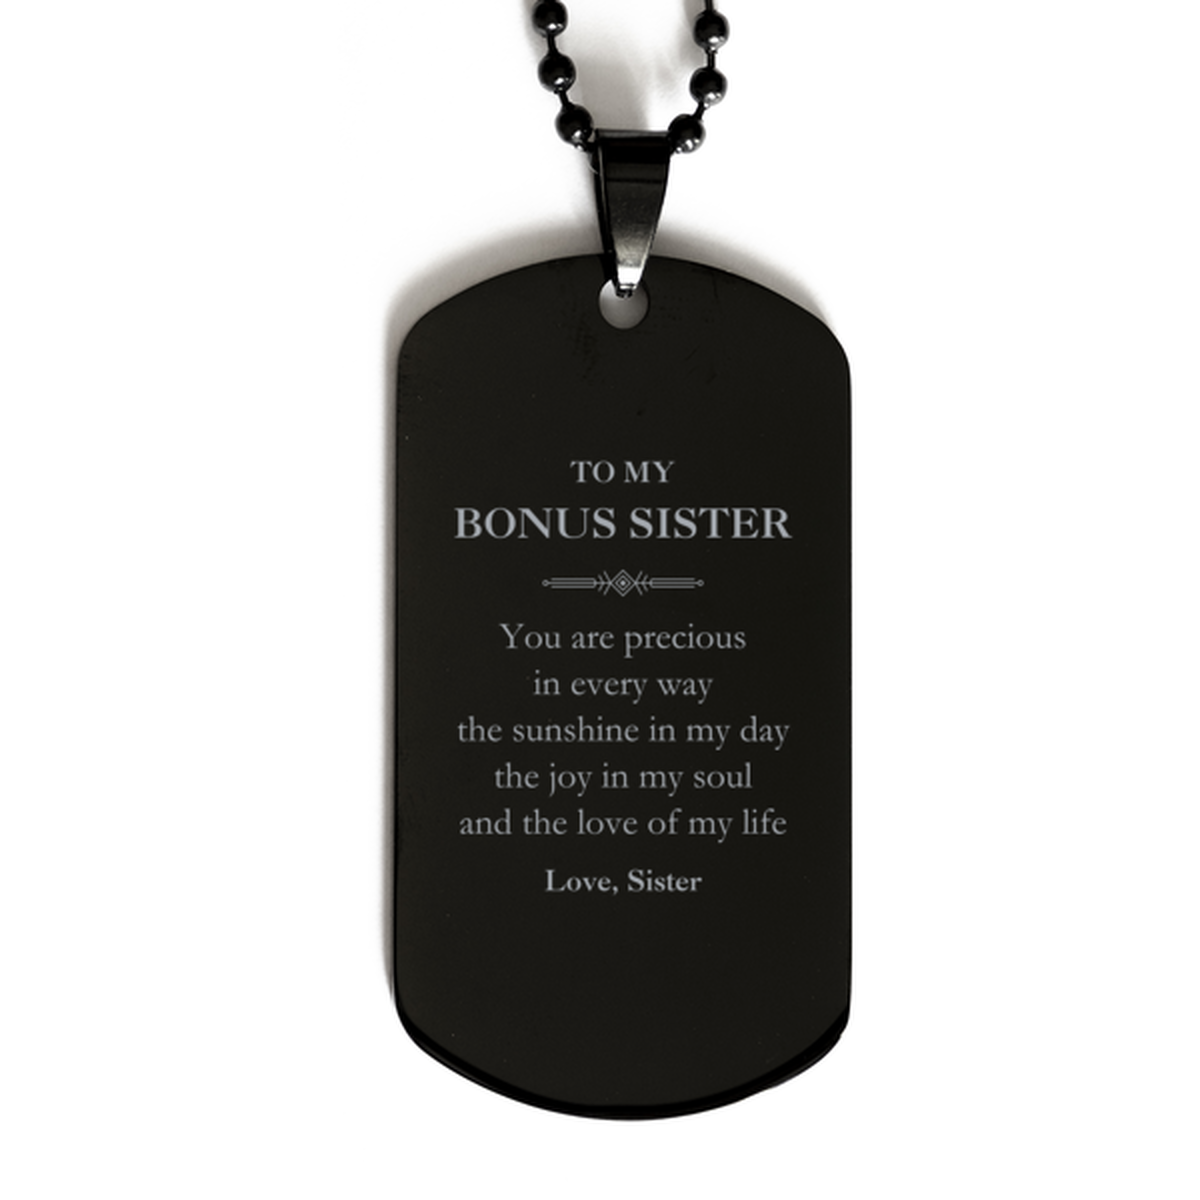 Graduation Gifts for Bonus Sister Black Dog Tag Present from Sister, Christmas Bonus Sister Birthday Gifts Bonus Sister You are precious in every way the sunshine in my day. Love, Sister